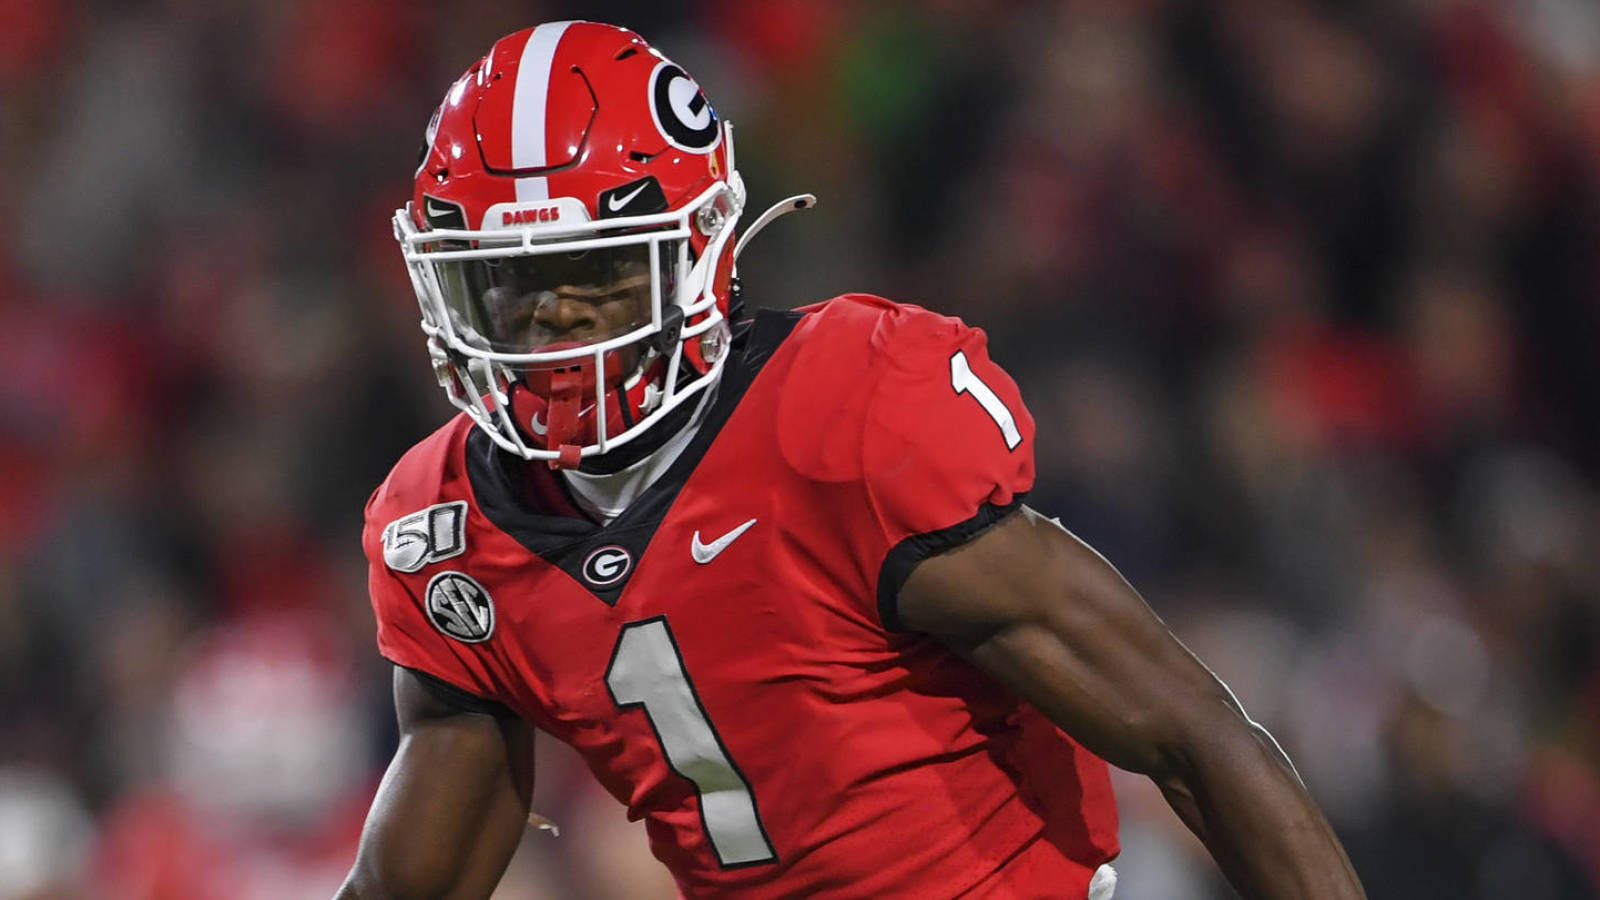 Georgia wide receiver George Pickens ejected for fighting